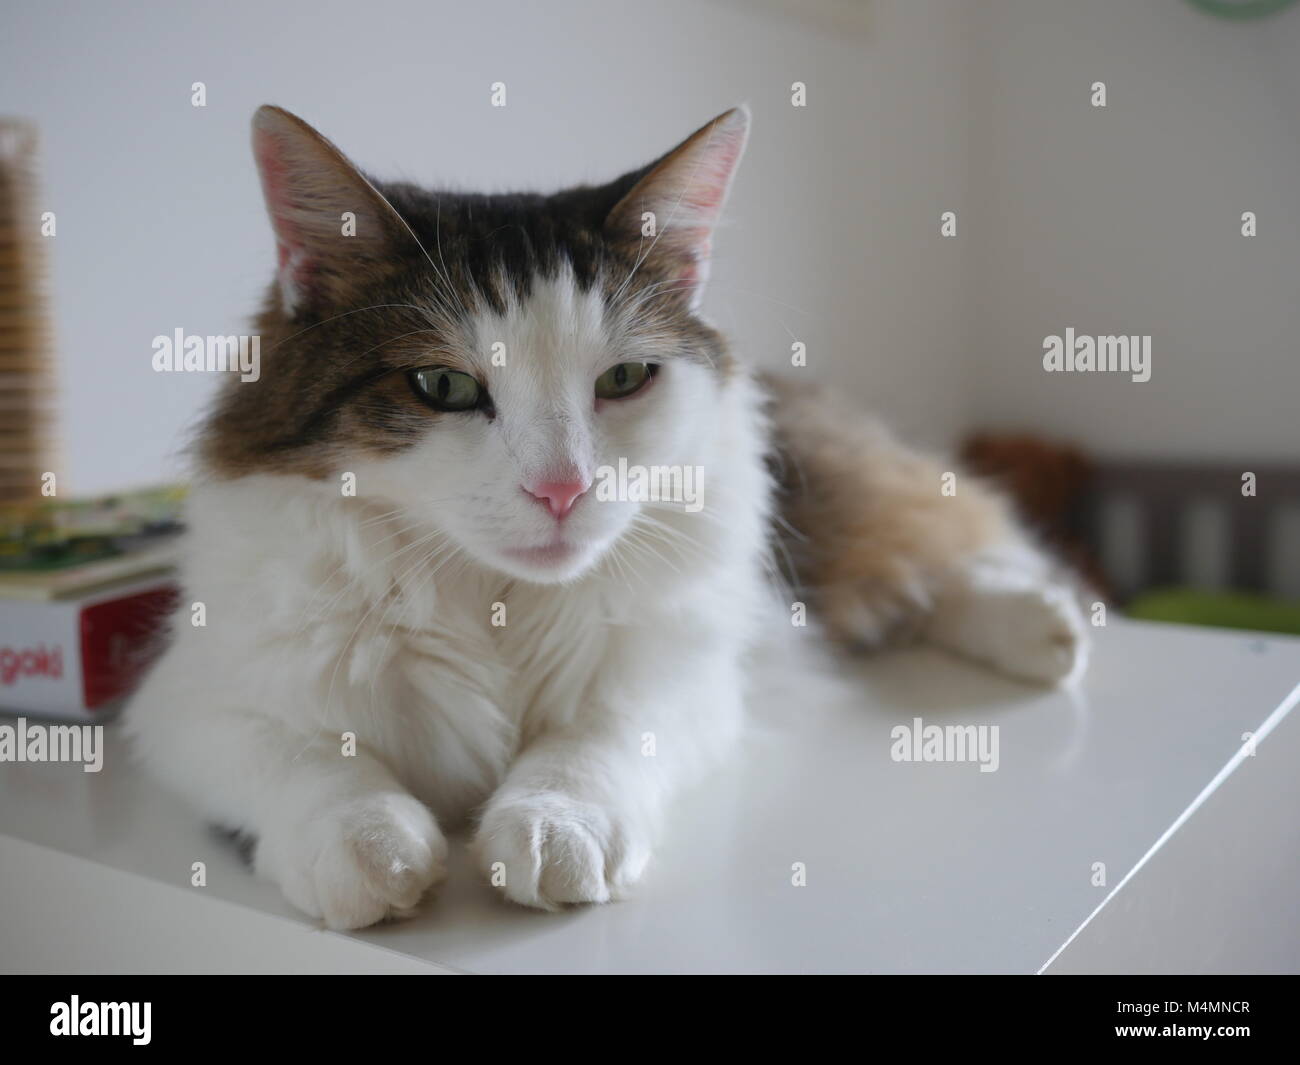 Premium AI Image  A cat wearing a trench coat sits at a table